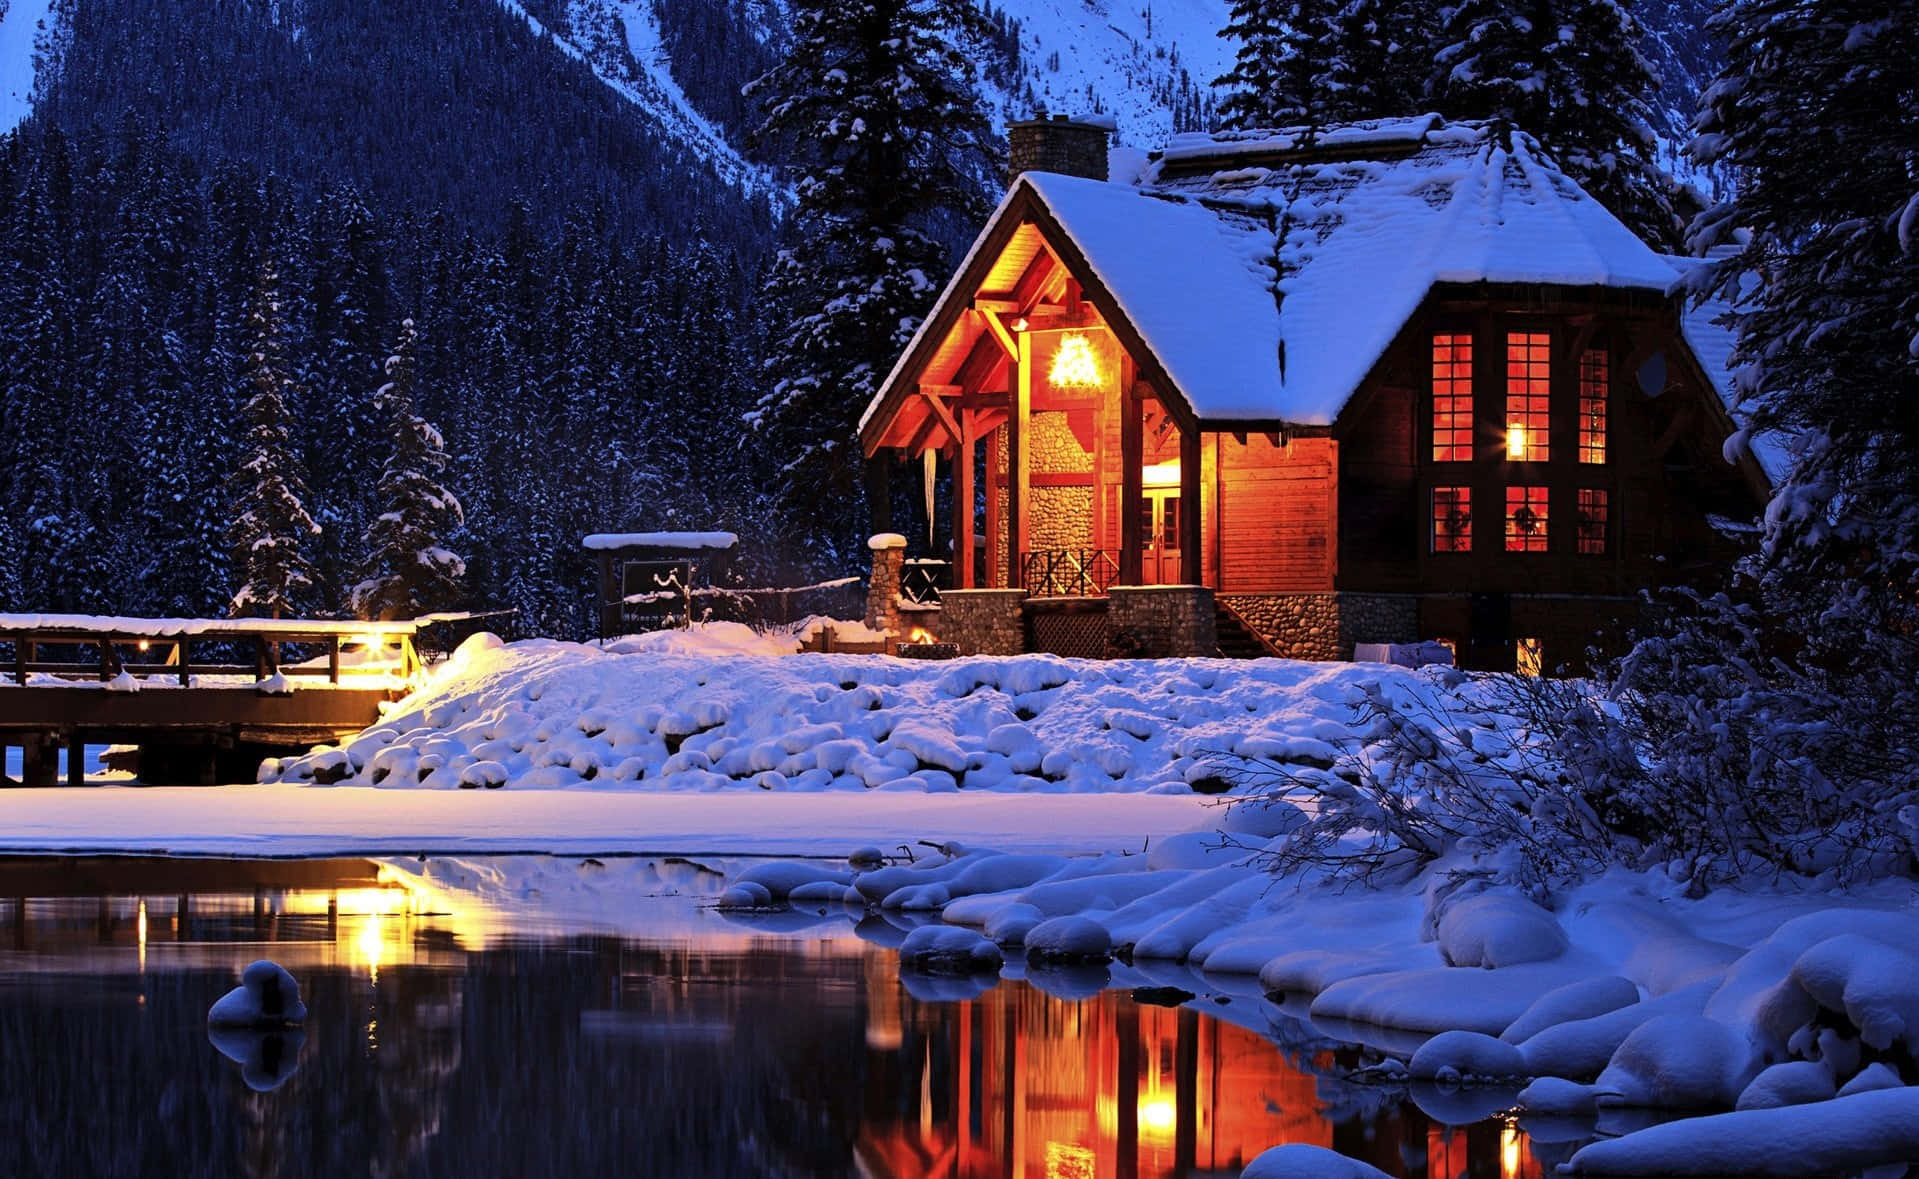 Cabin Covered In Snow At Night